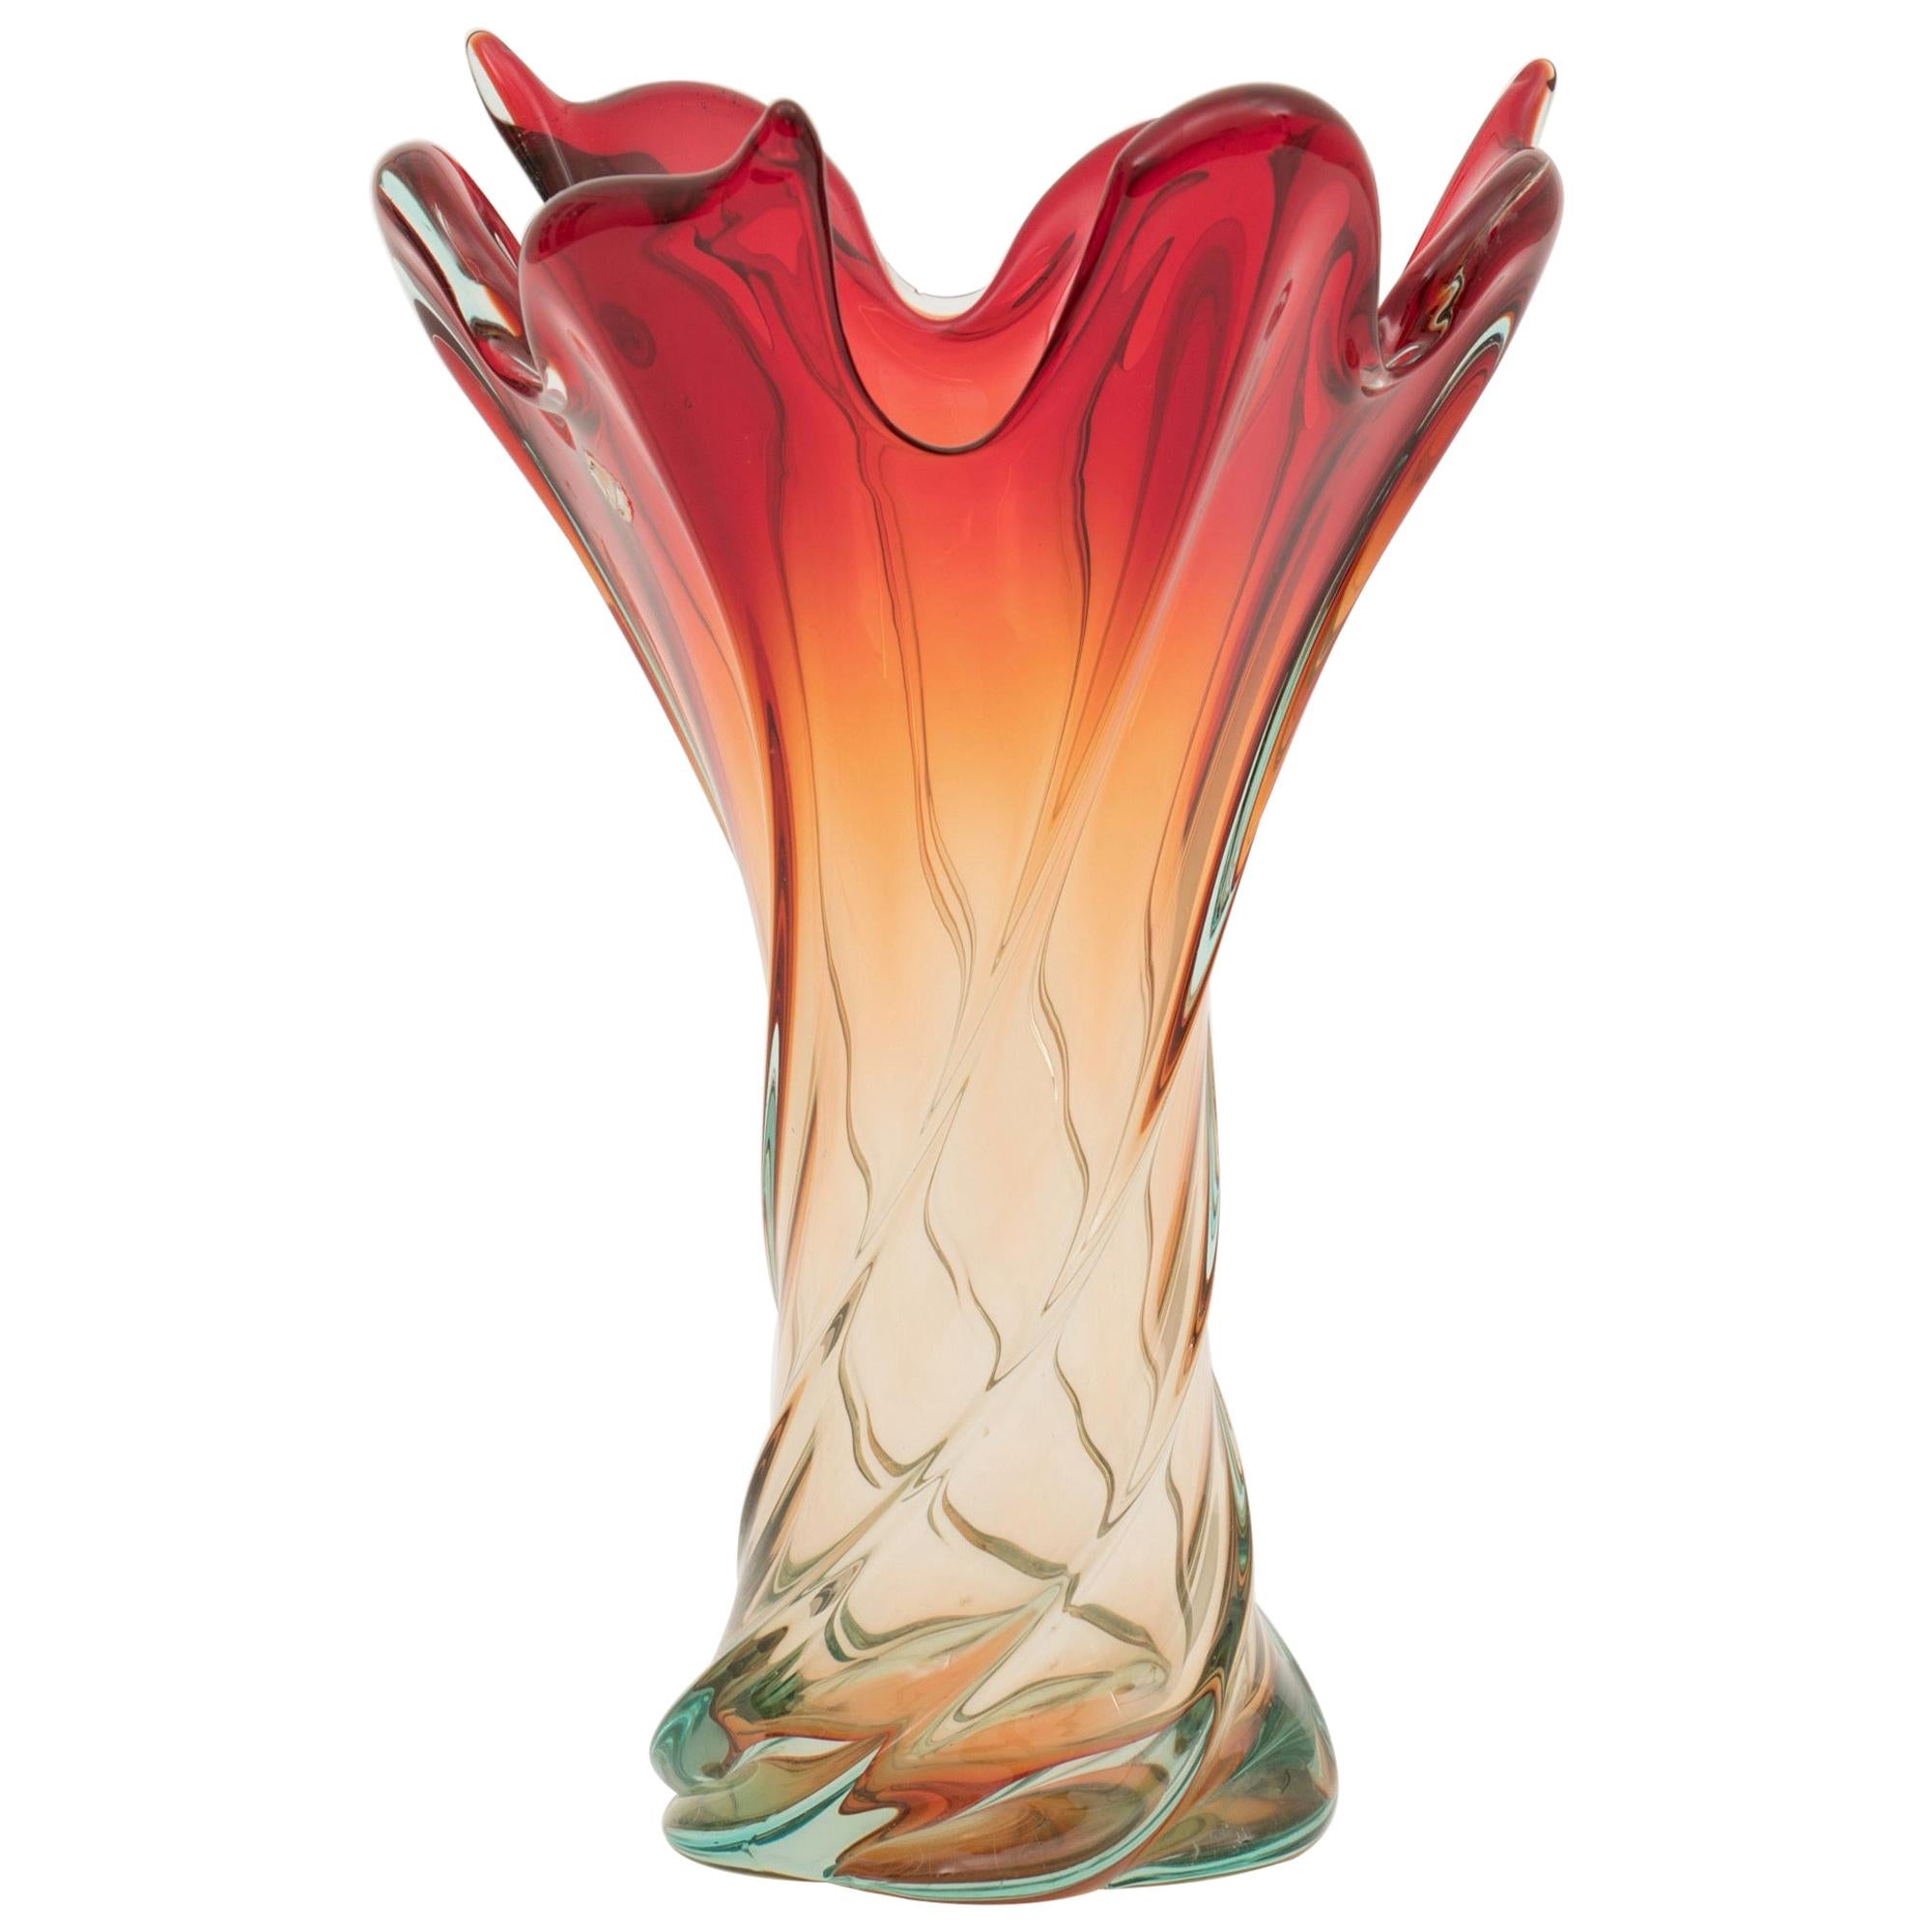 Large Midcentury Italian Murano Glass Vase circa 1960 Blue Amber to Flame Red